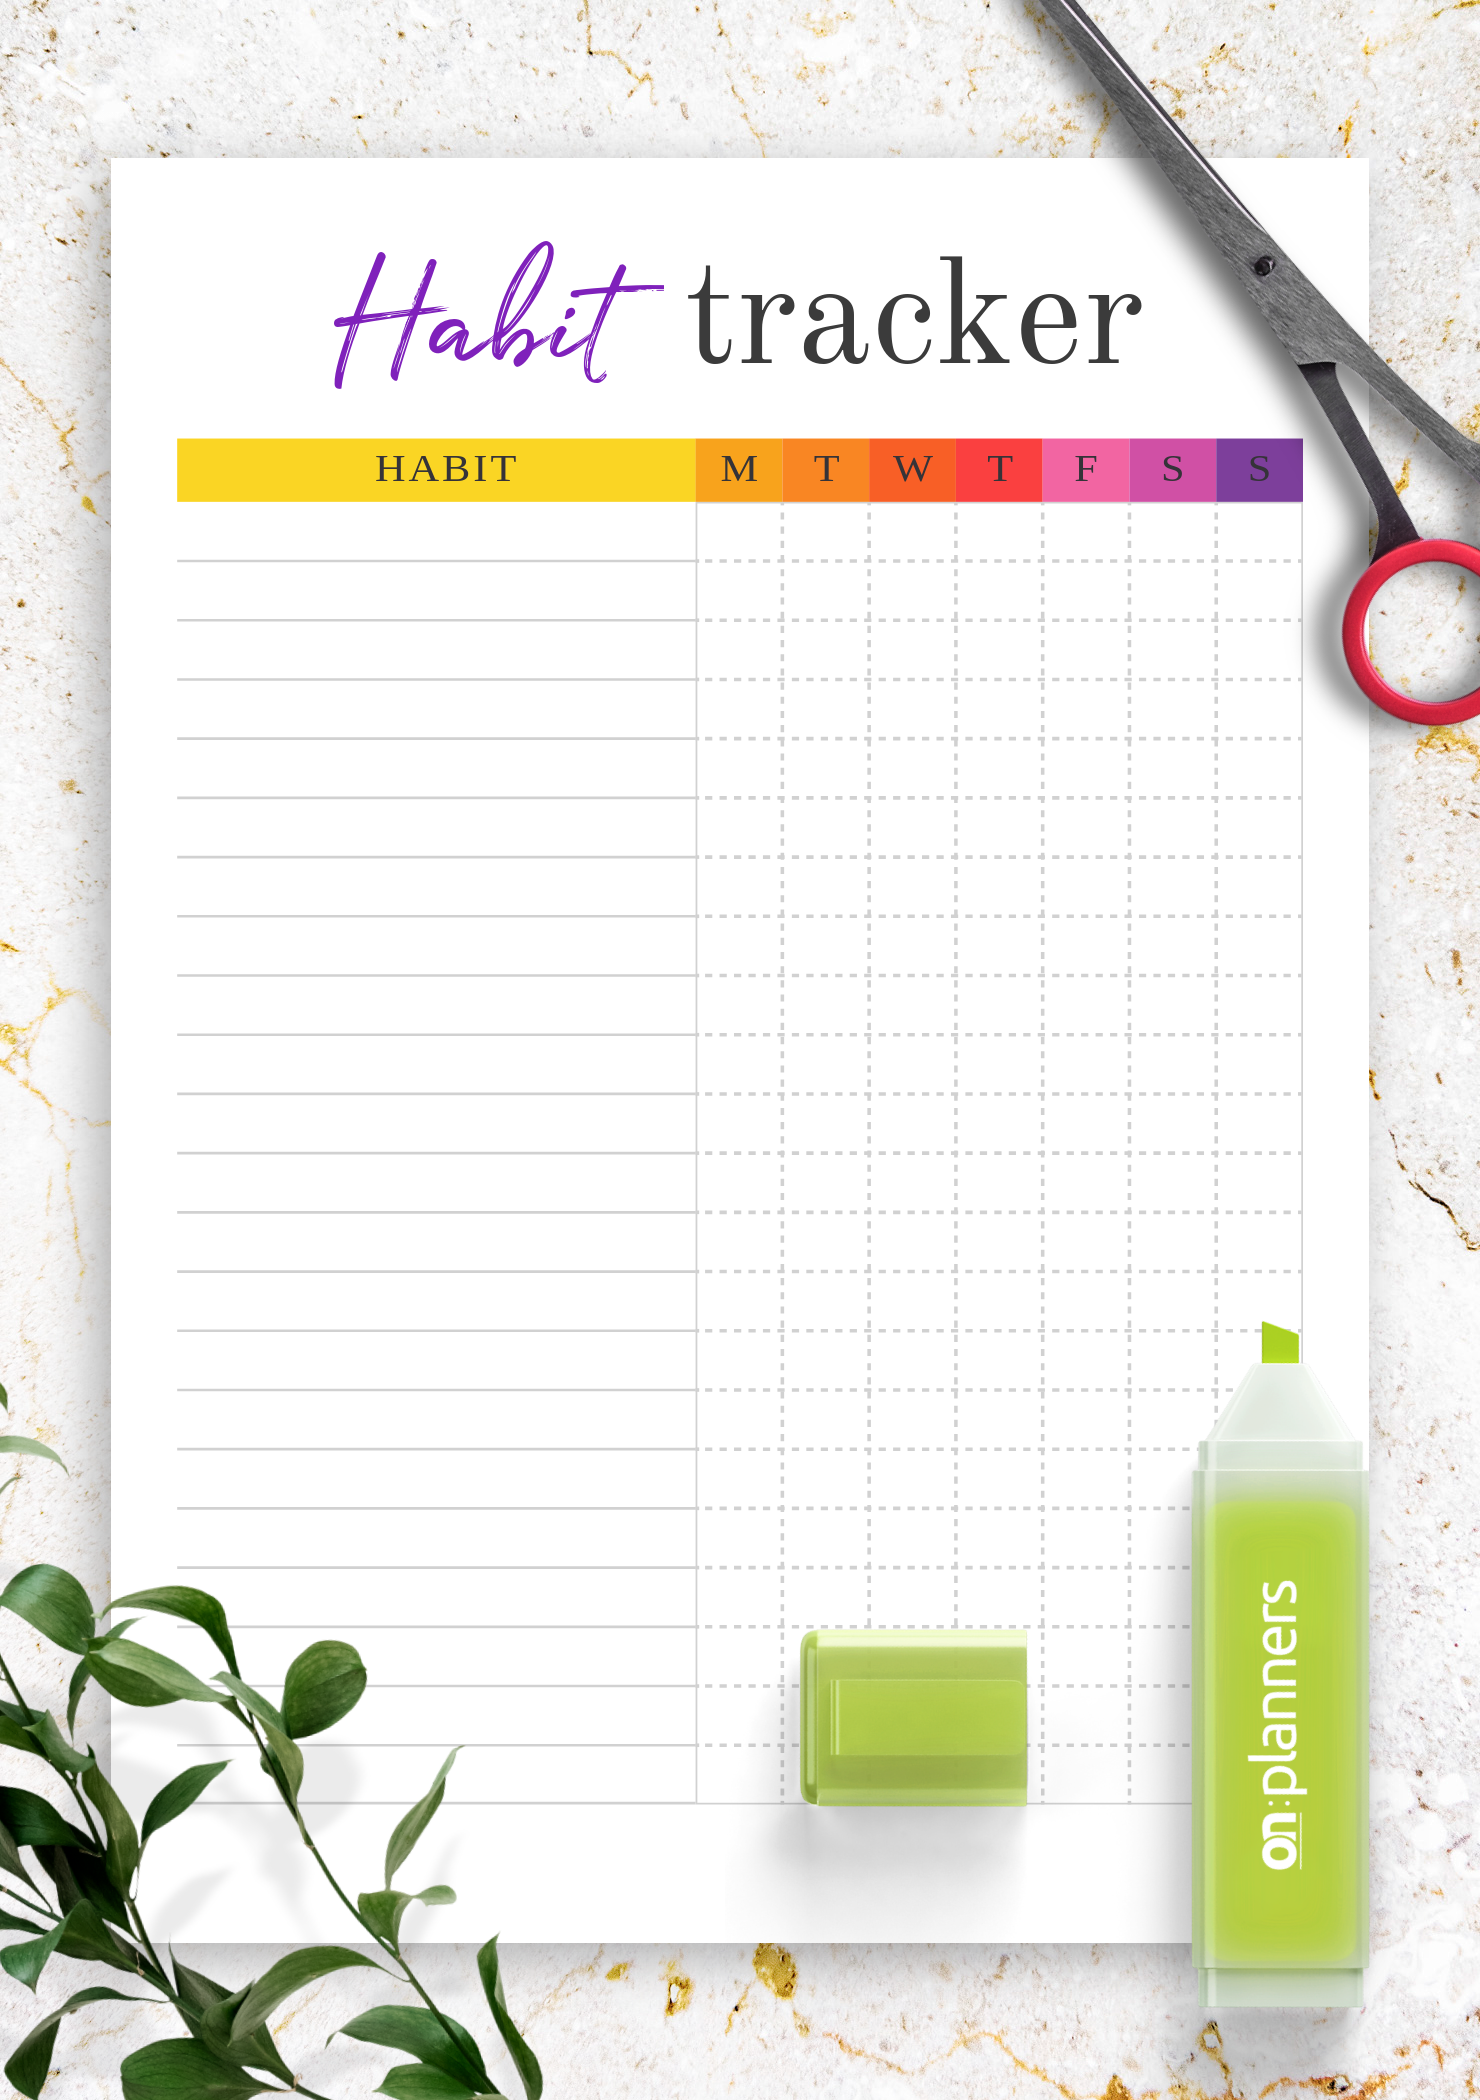 Habit Tracker How To Use One Free Printable All In One Photos